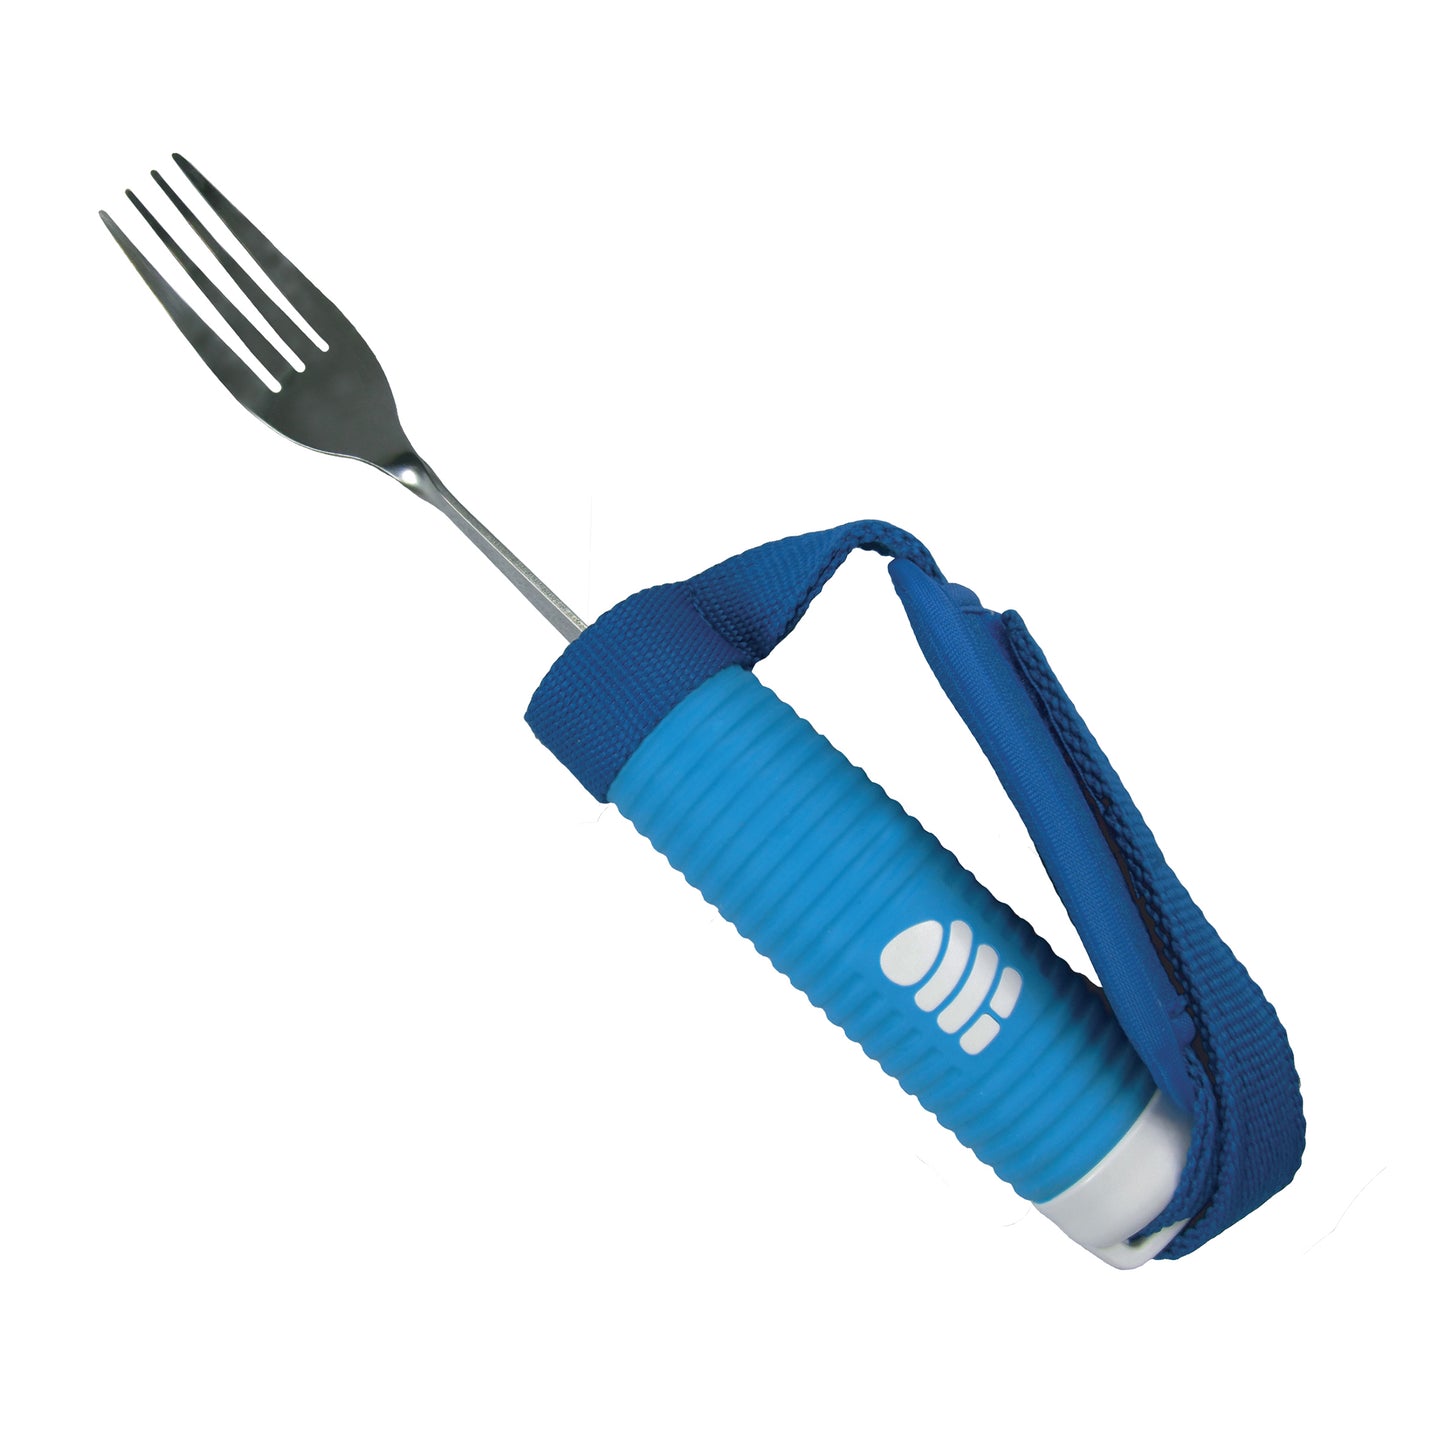 Cutlery Comfort Grip Weighted